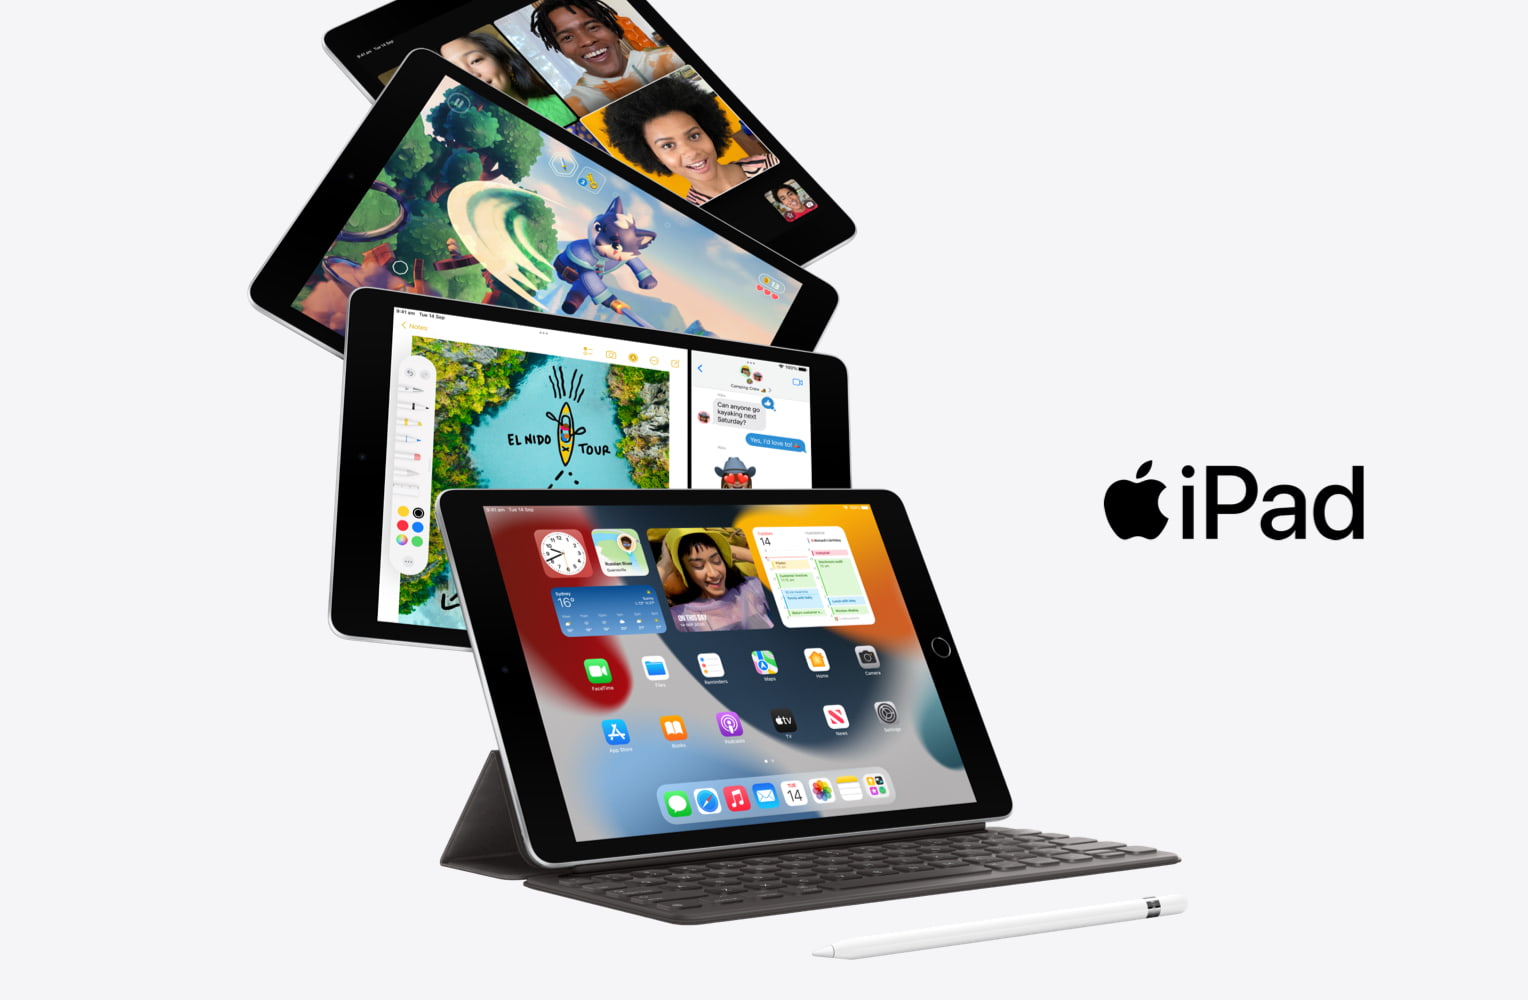 A graphic demonstration of the many functions of the iPad. An iPad 9th Gen stands upright on its cover, with keyboard and Apple Pen. Behind it three more iPads fan out, each with a different app on screen. Text on image says, ‘iPad’, accompanied by the Apple logo.